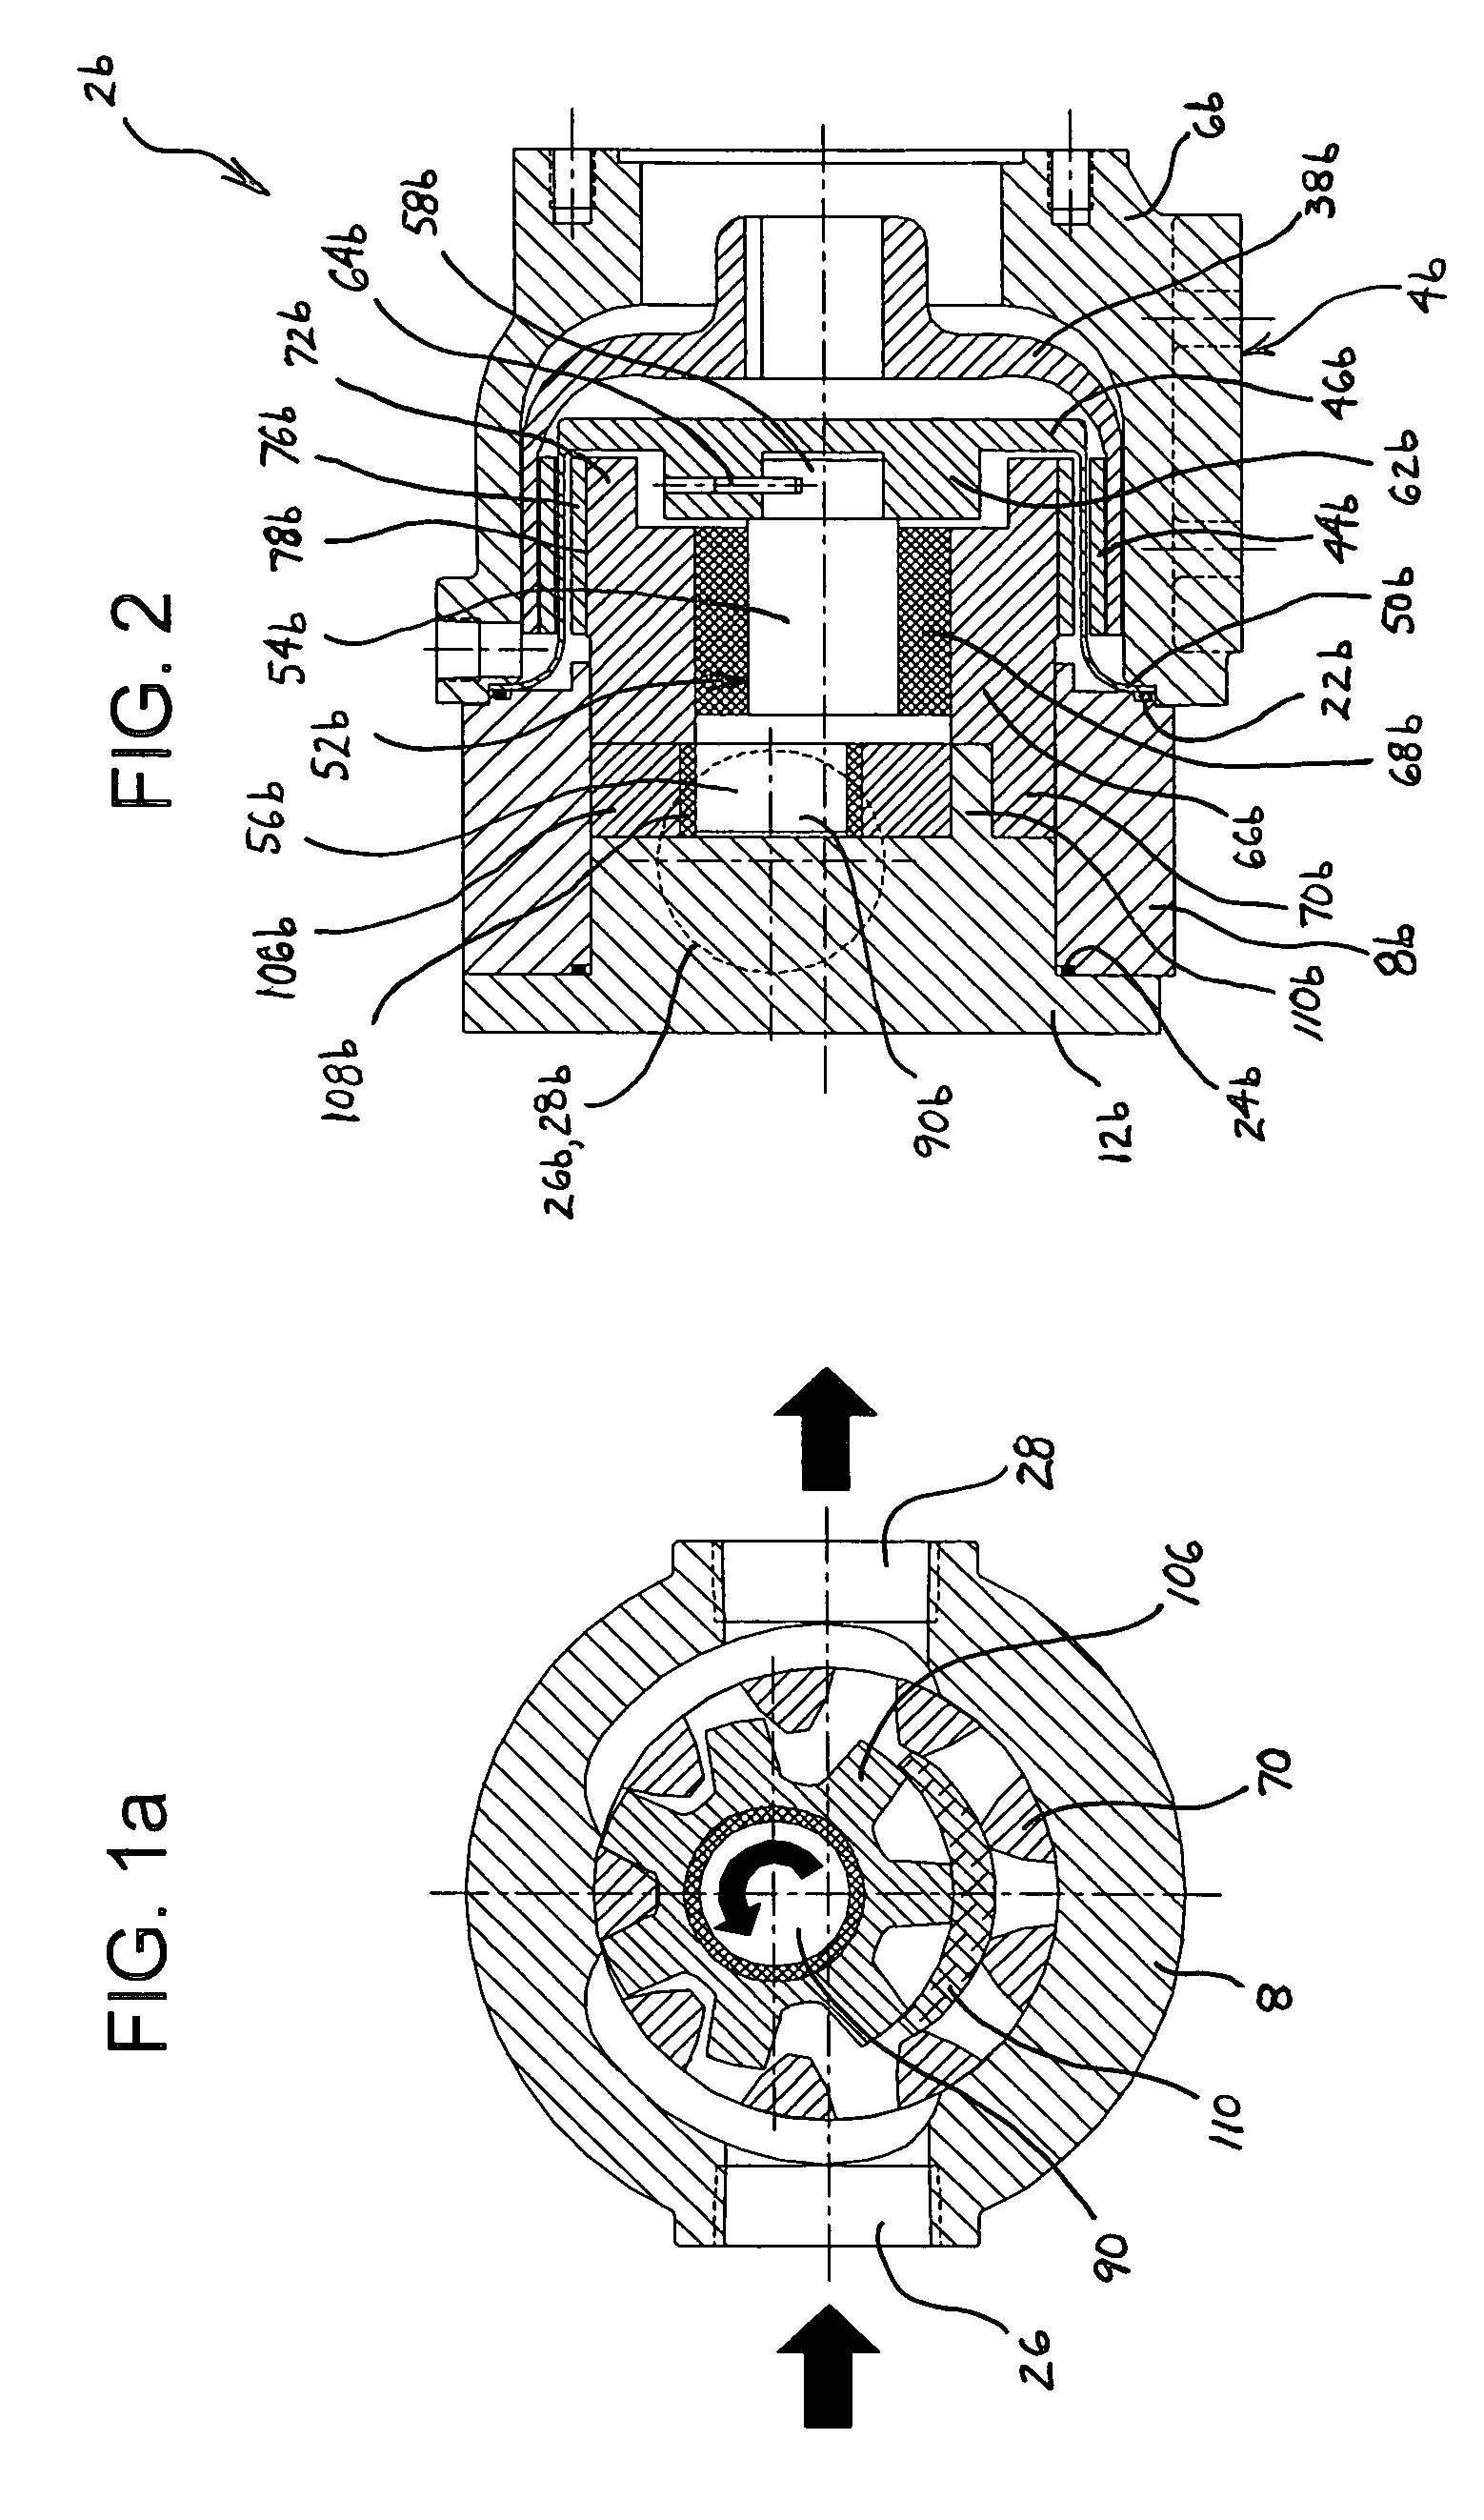 Magnetically driven gear pump